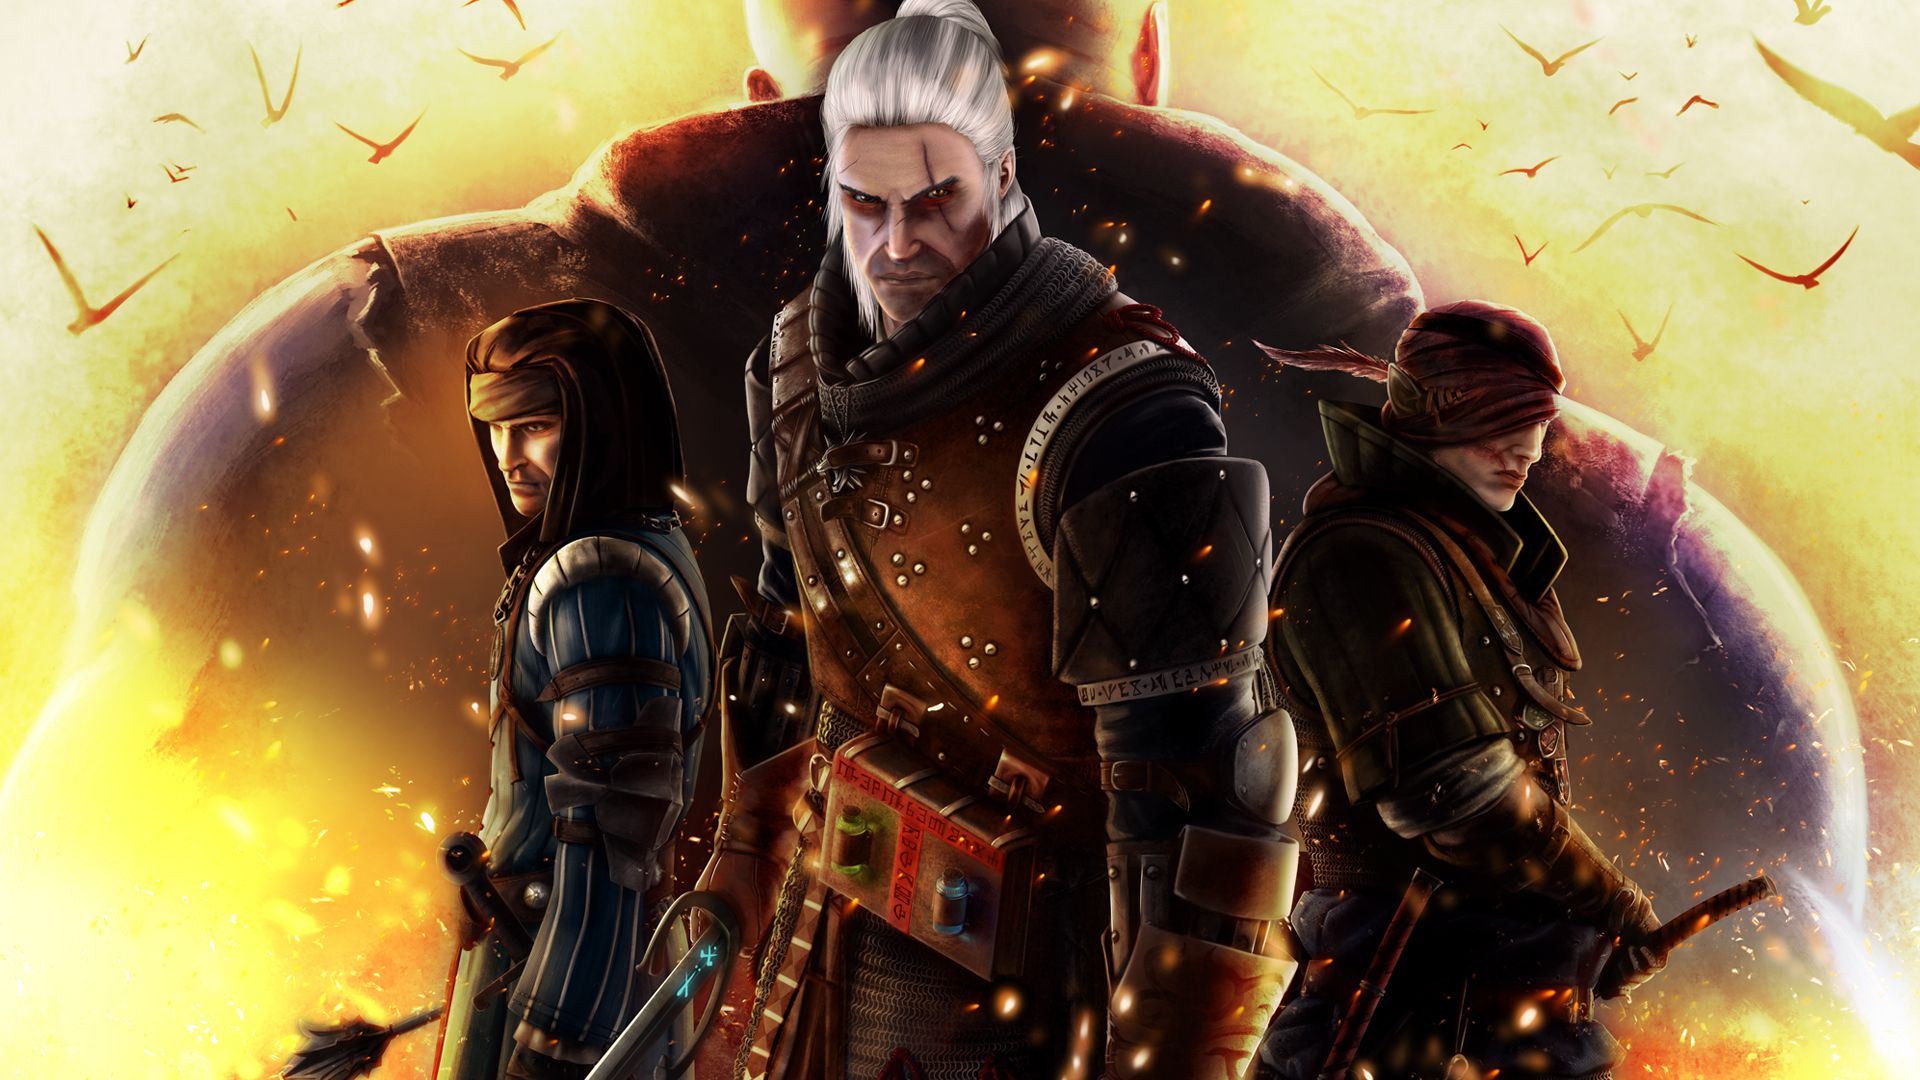 Video Game The Witcher 2 Assassins Of Kings Wallpaper:1920x1080